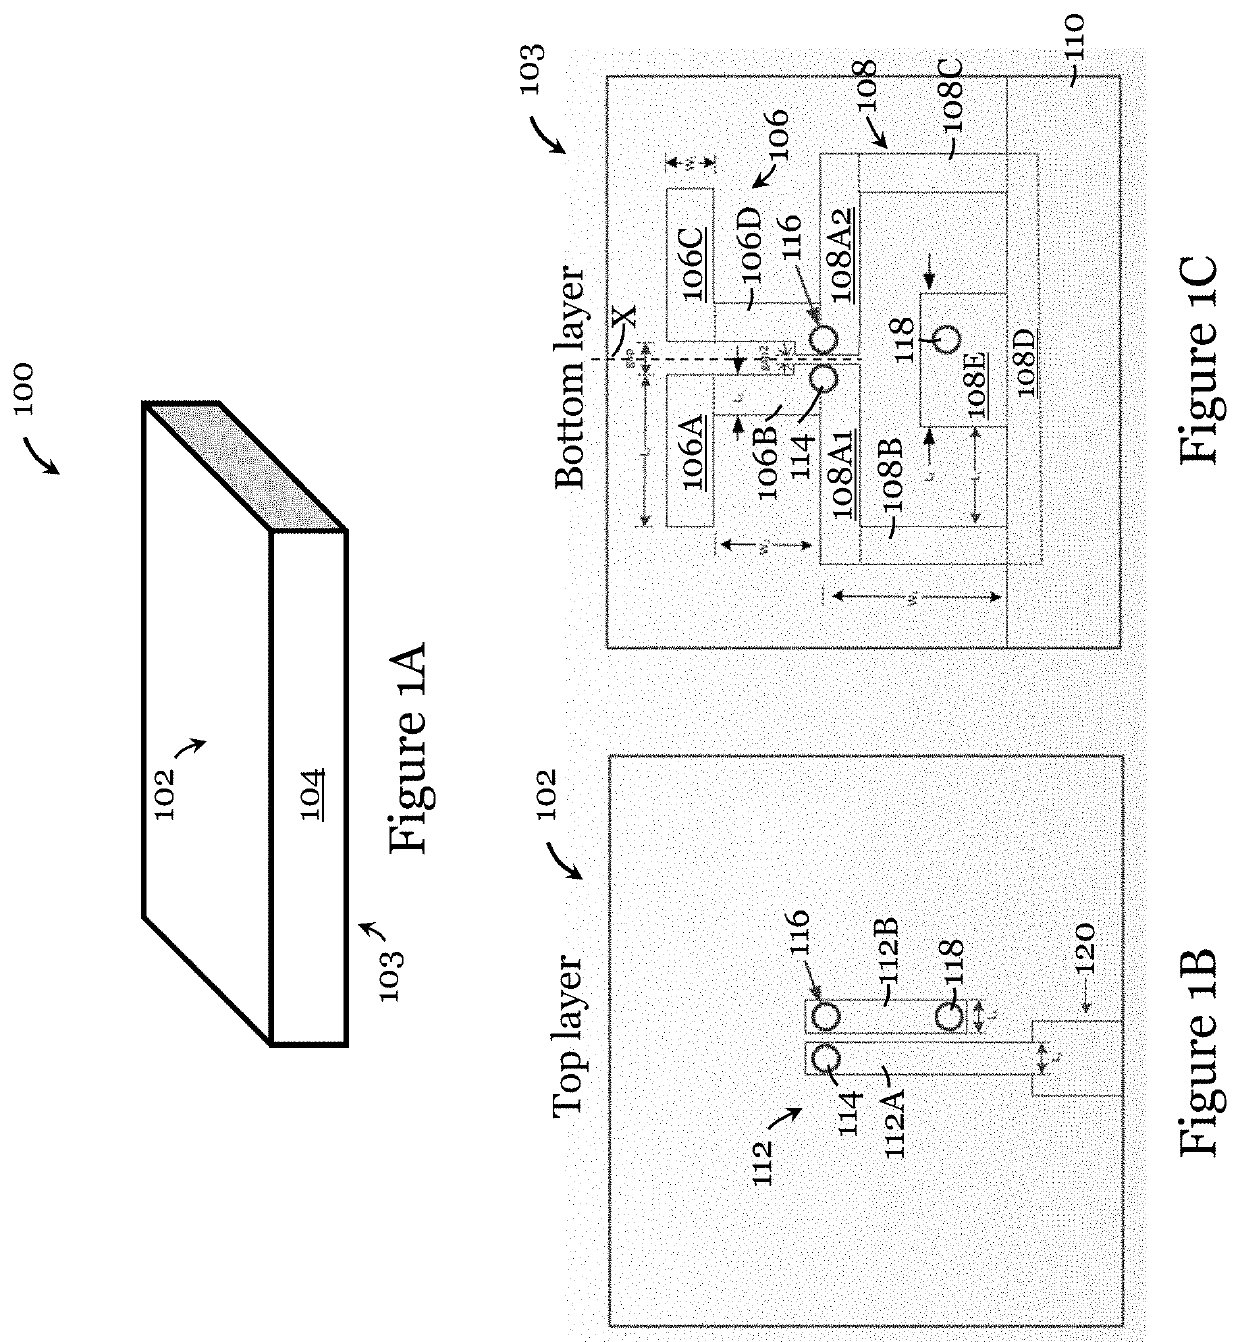 Planar complementary antenna and related antenna array